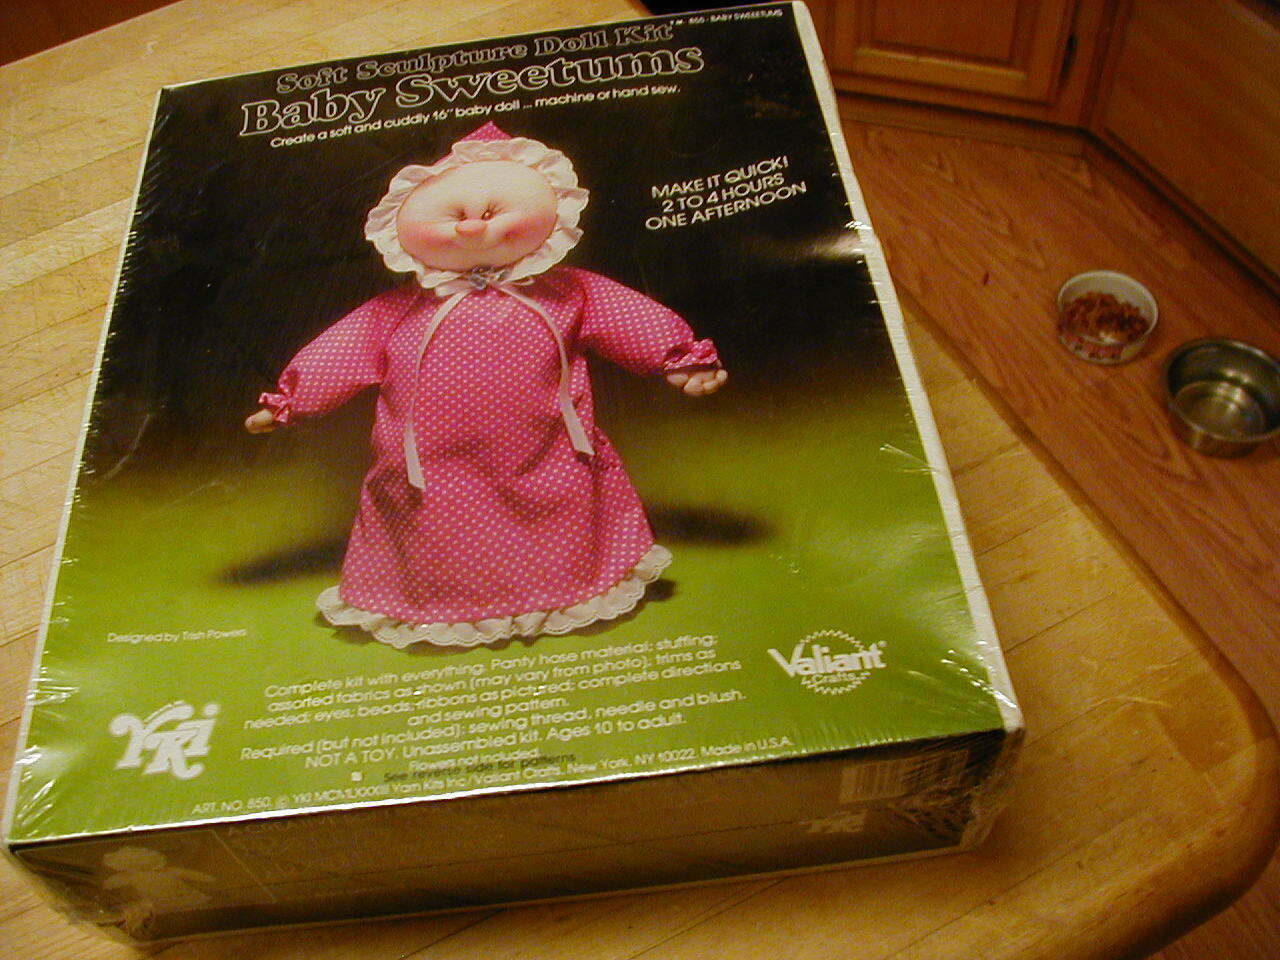 Valiant Crafts "baby Sweetums" 16" Baby Doll Soft Sculpture Doll Kit--new Sealed